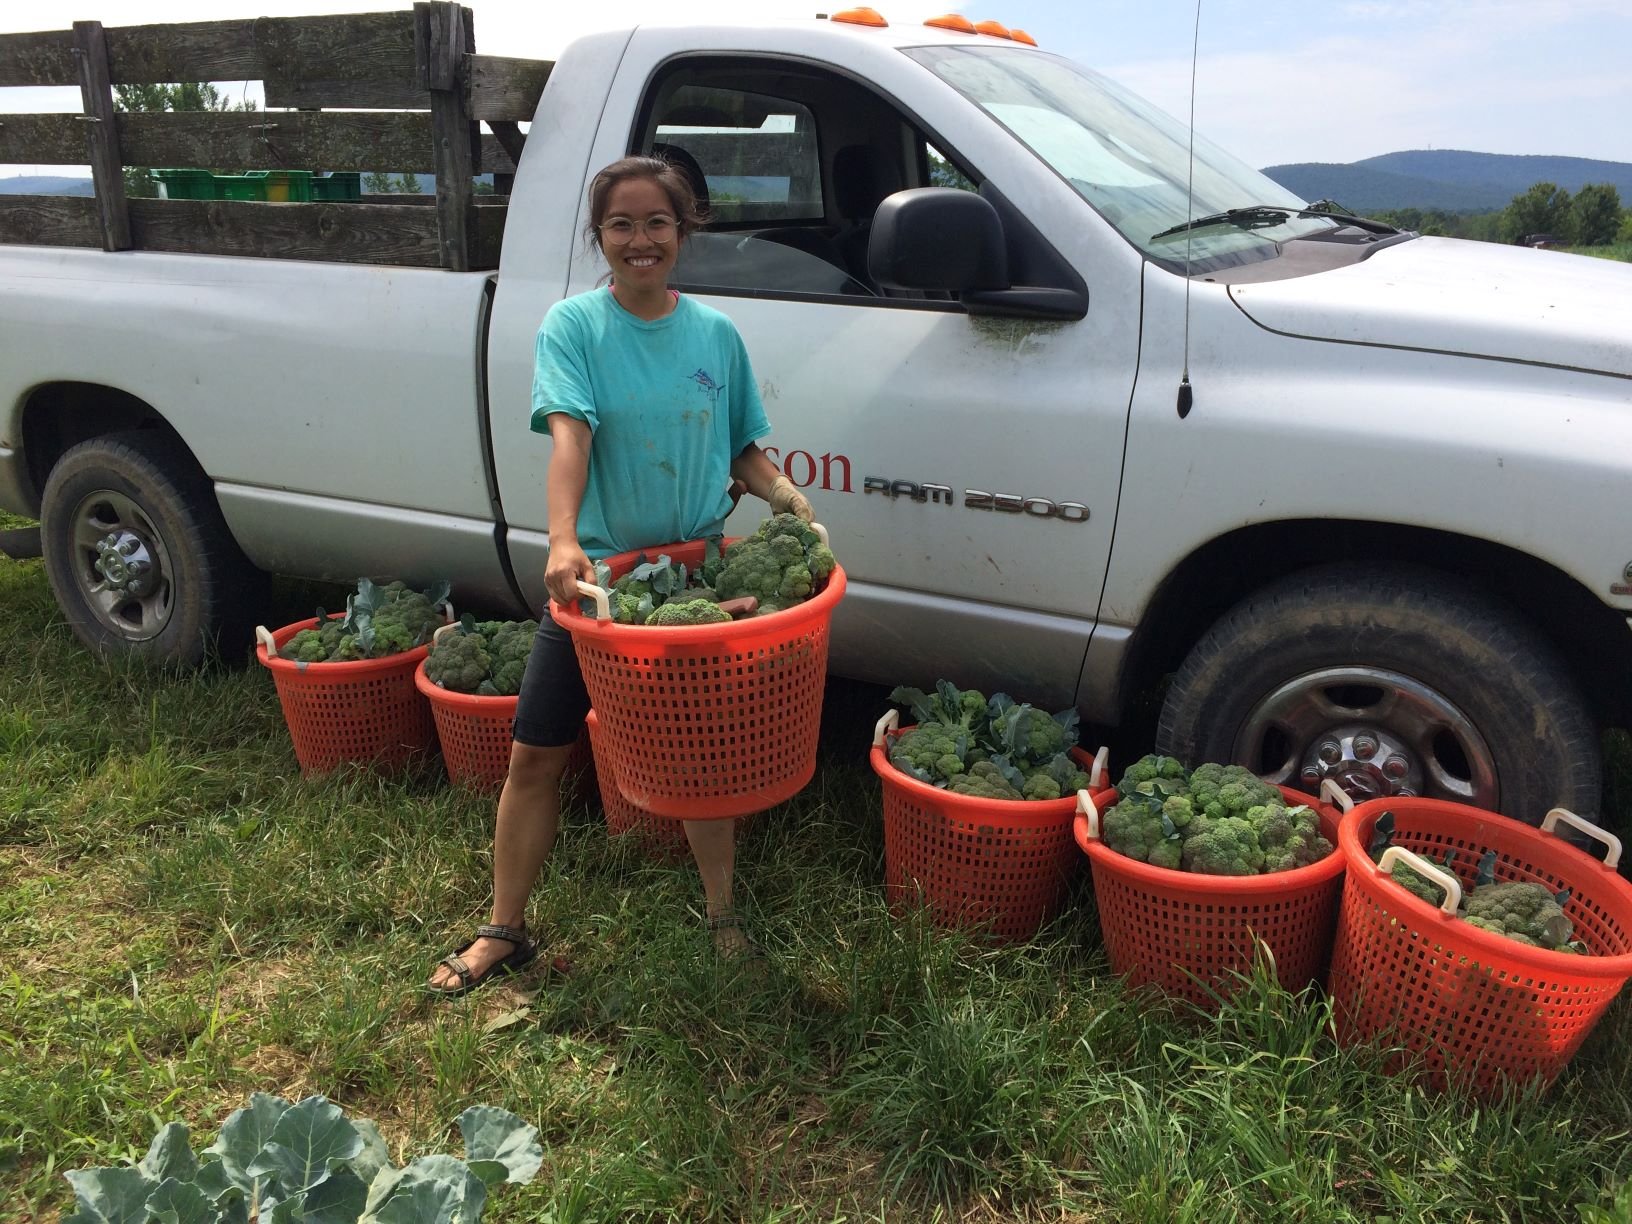 Tuesday CSA: Dickinson College Farm Field Notes for Week of July 1st!